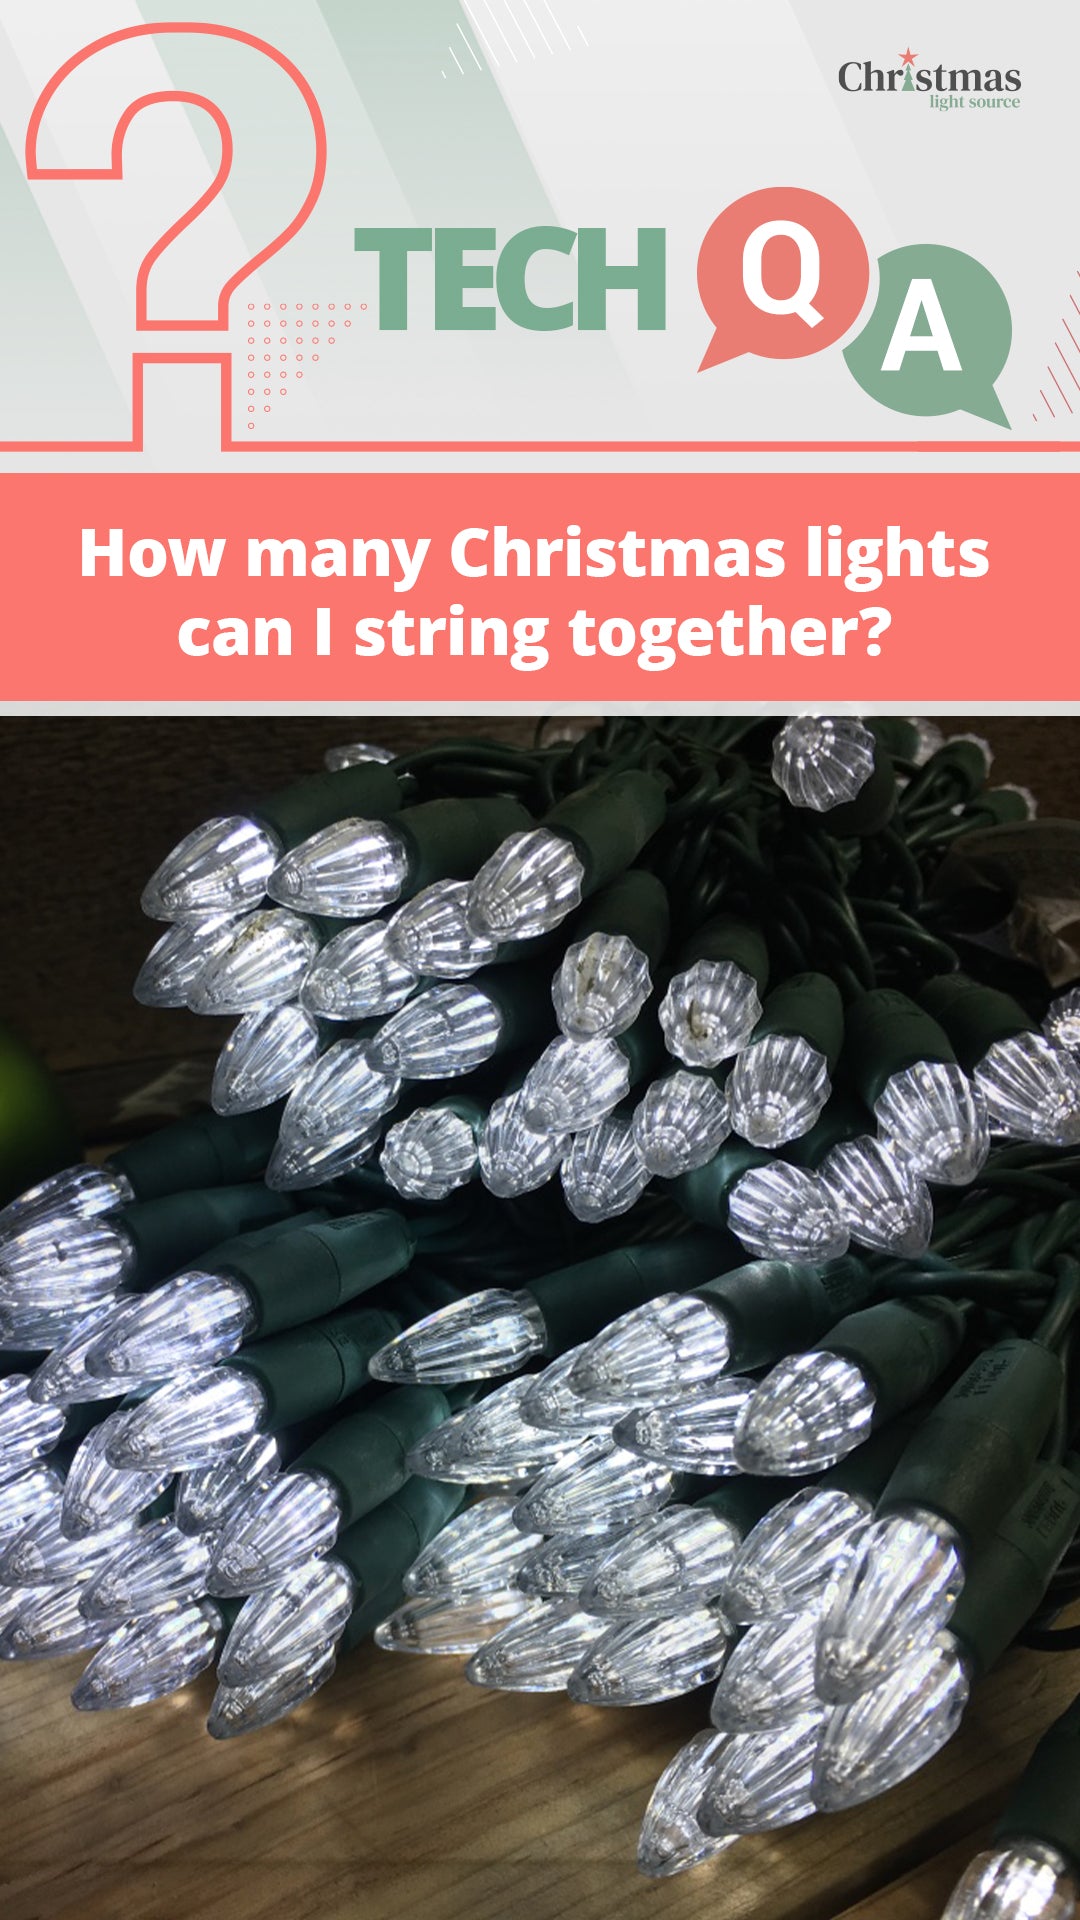 How many Christmas lights can I string together?